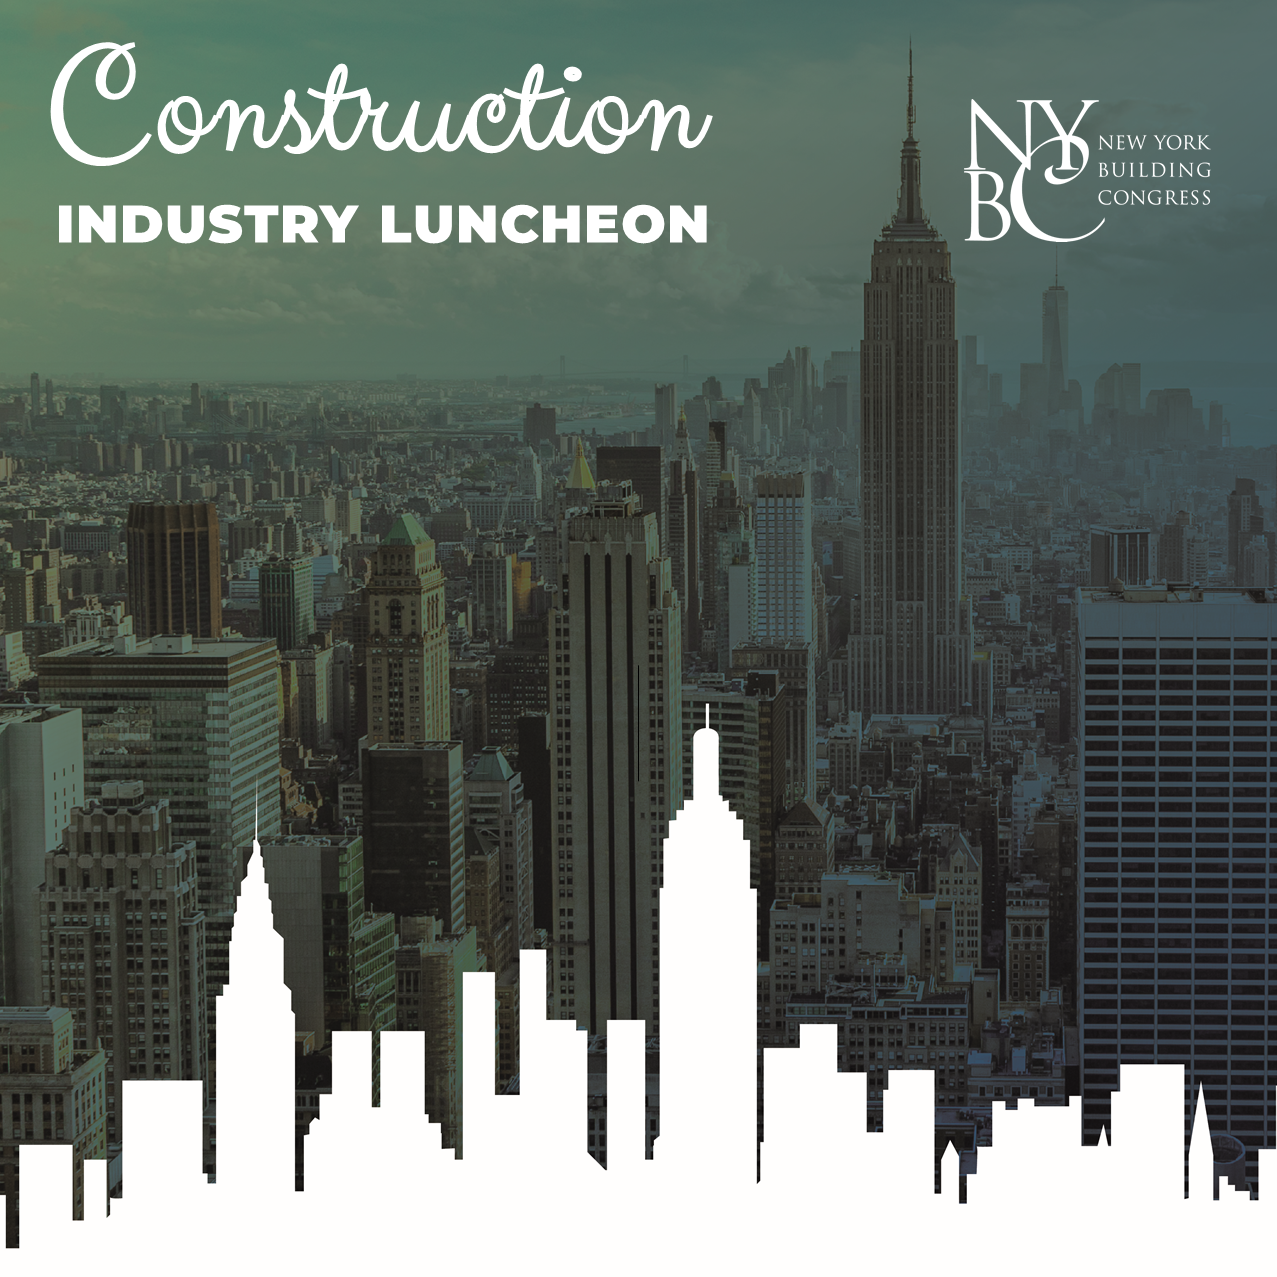 Construction Industry Luncheon